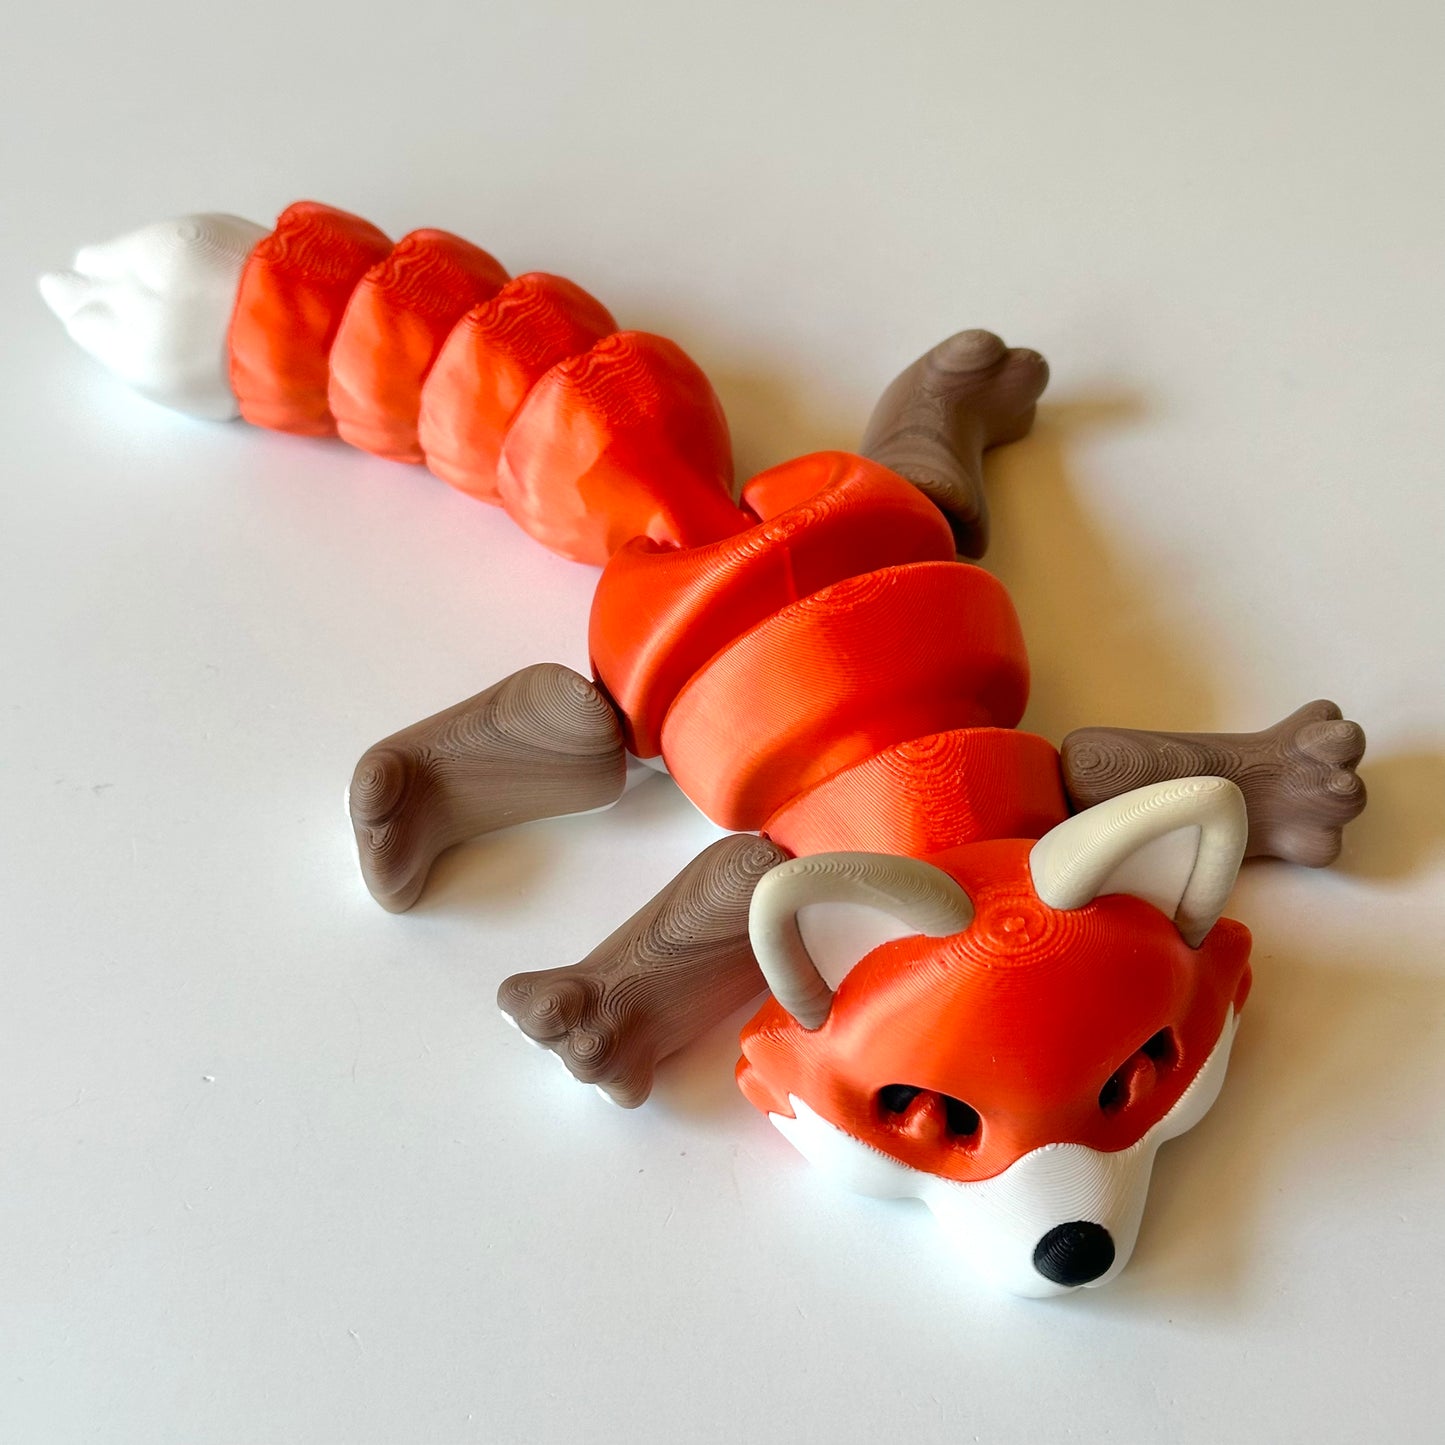 Giant Fox - 3D Printed Articulating Figure